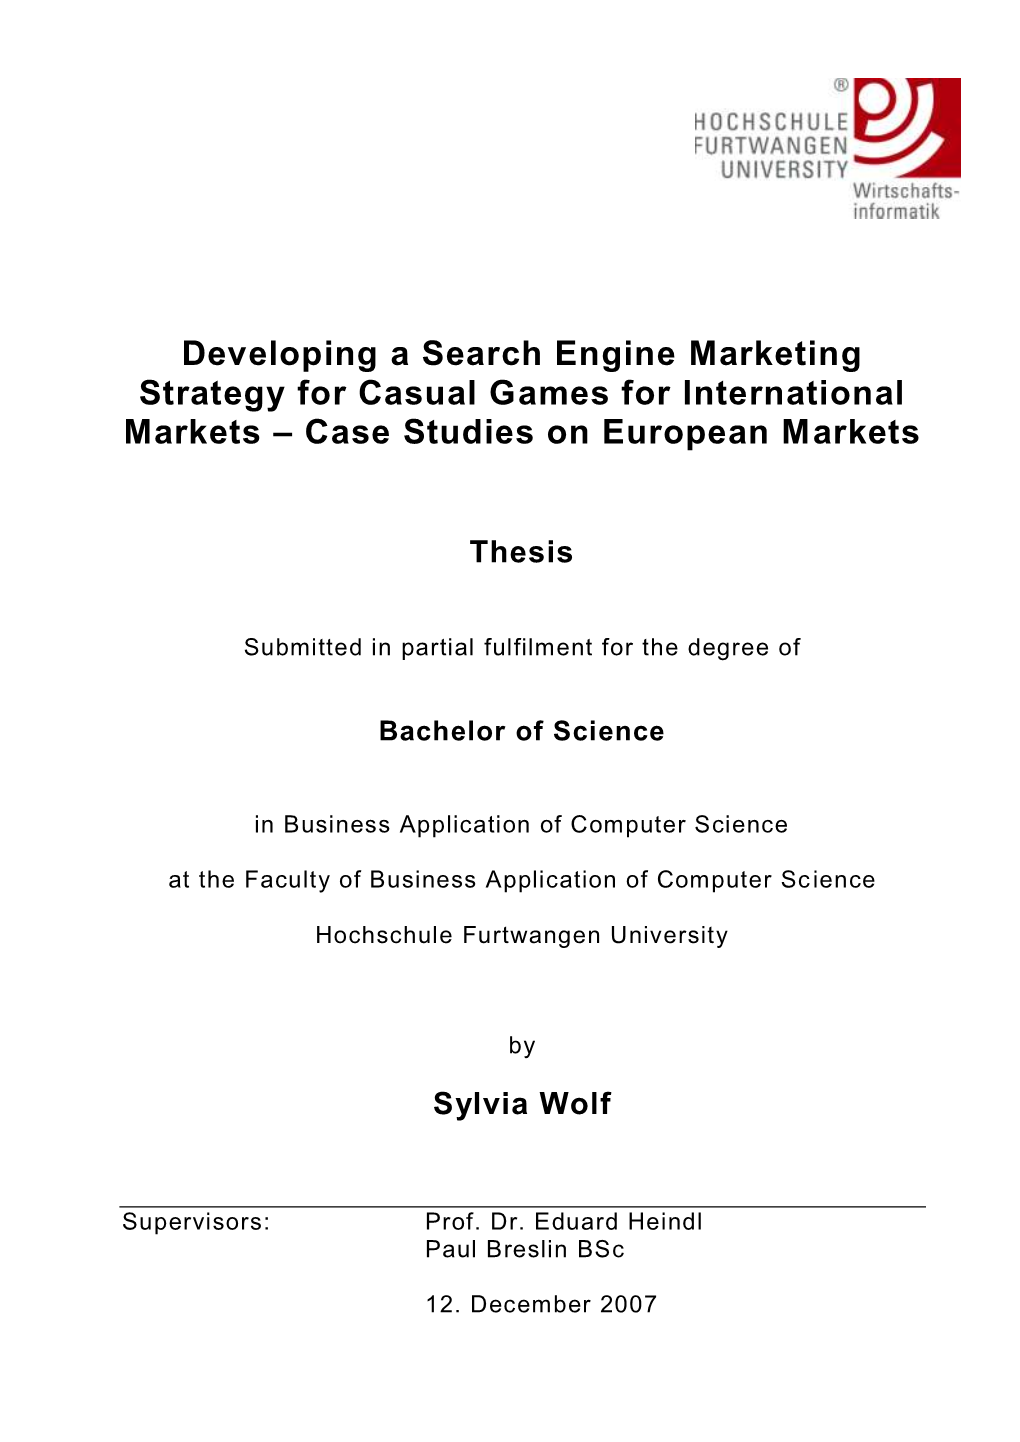 Developing a Search Engine Marketing Strategy for Casual Games for International Markets – Case Studies on European Markets